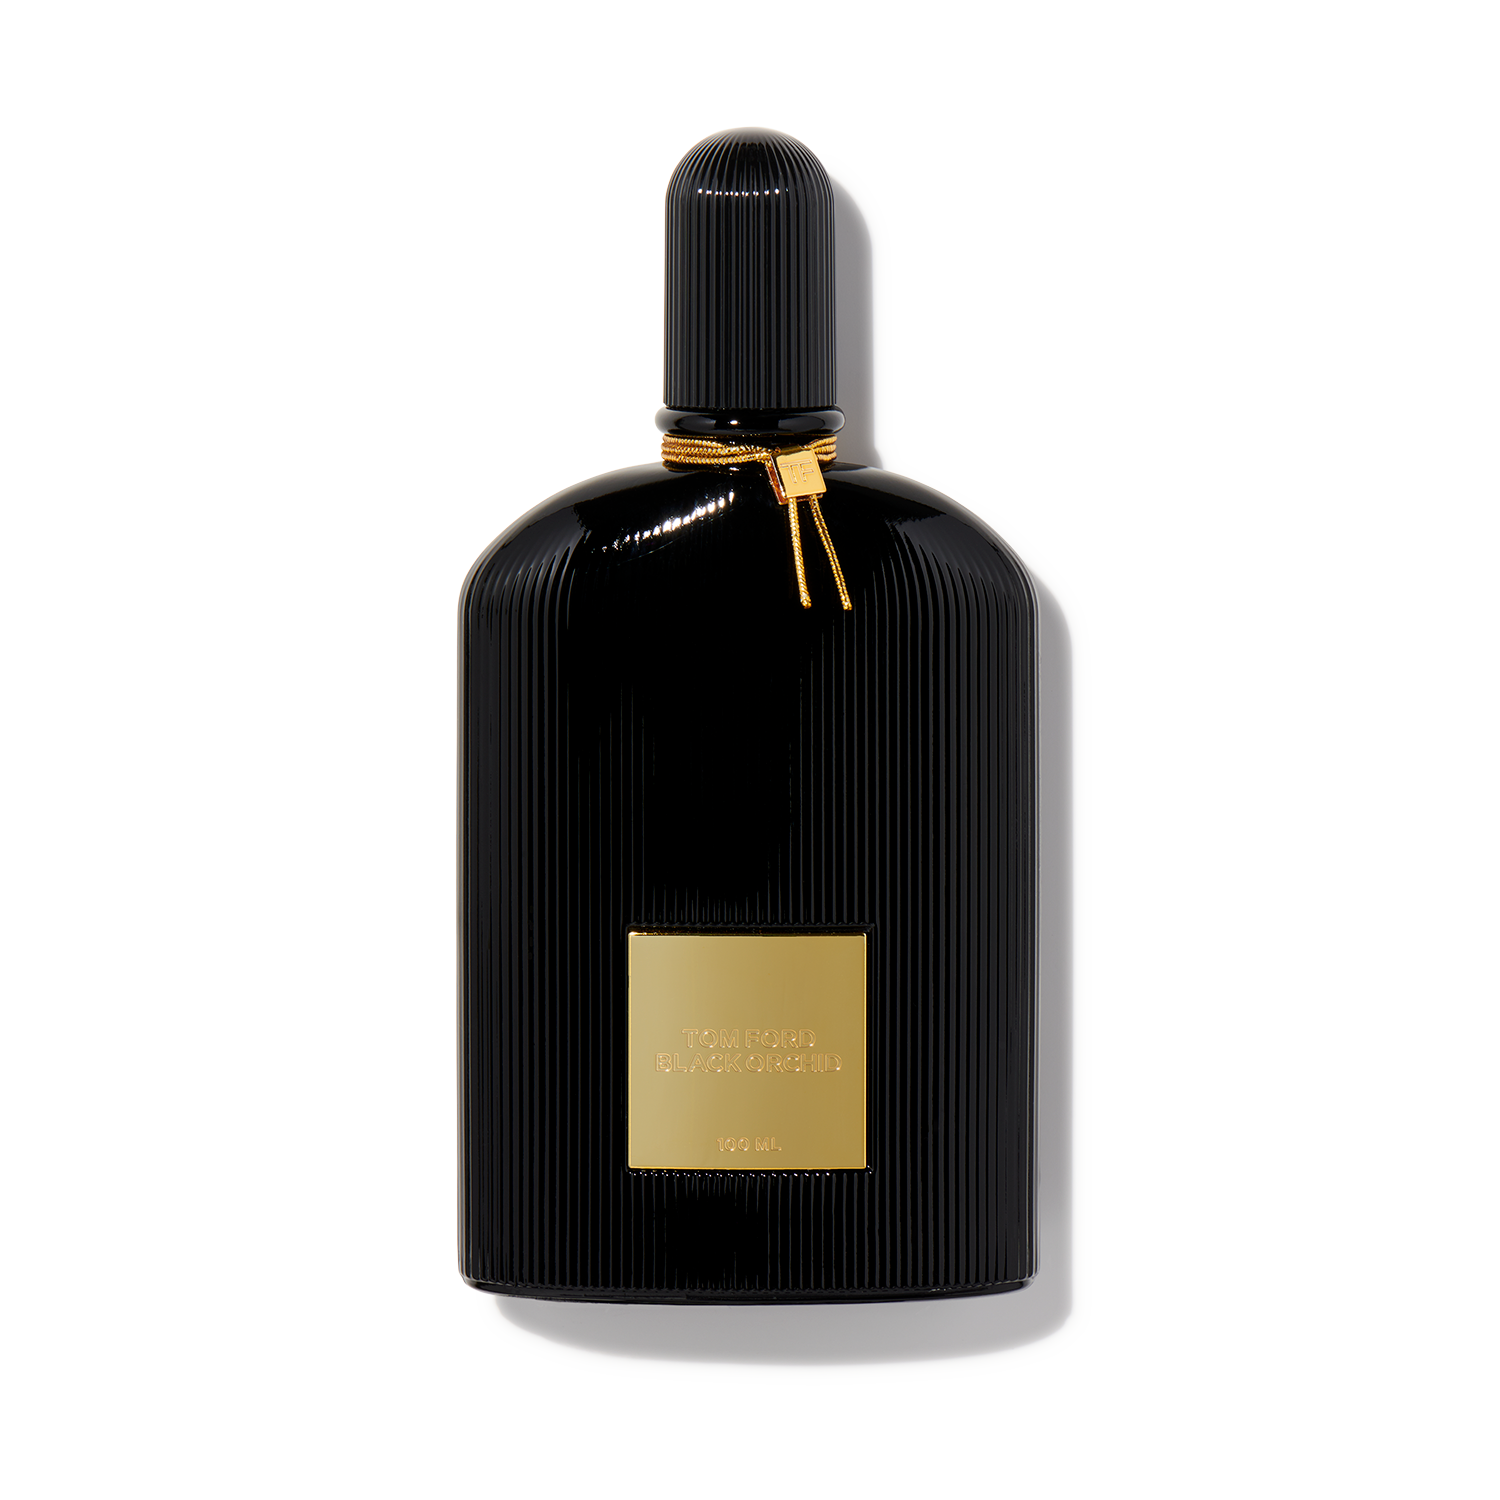 Score Black Orchid Tom Ford at Scentbird for 16.95